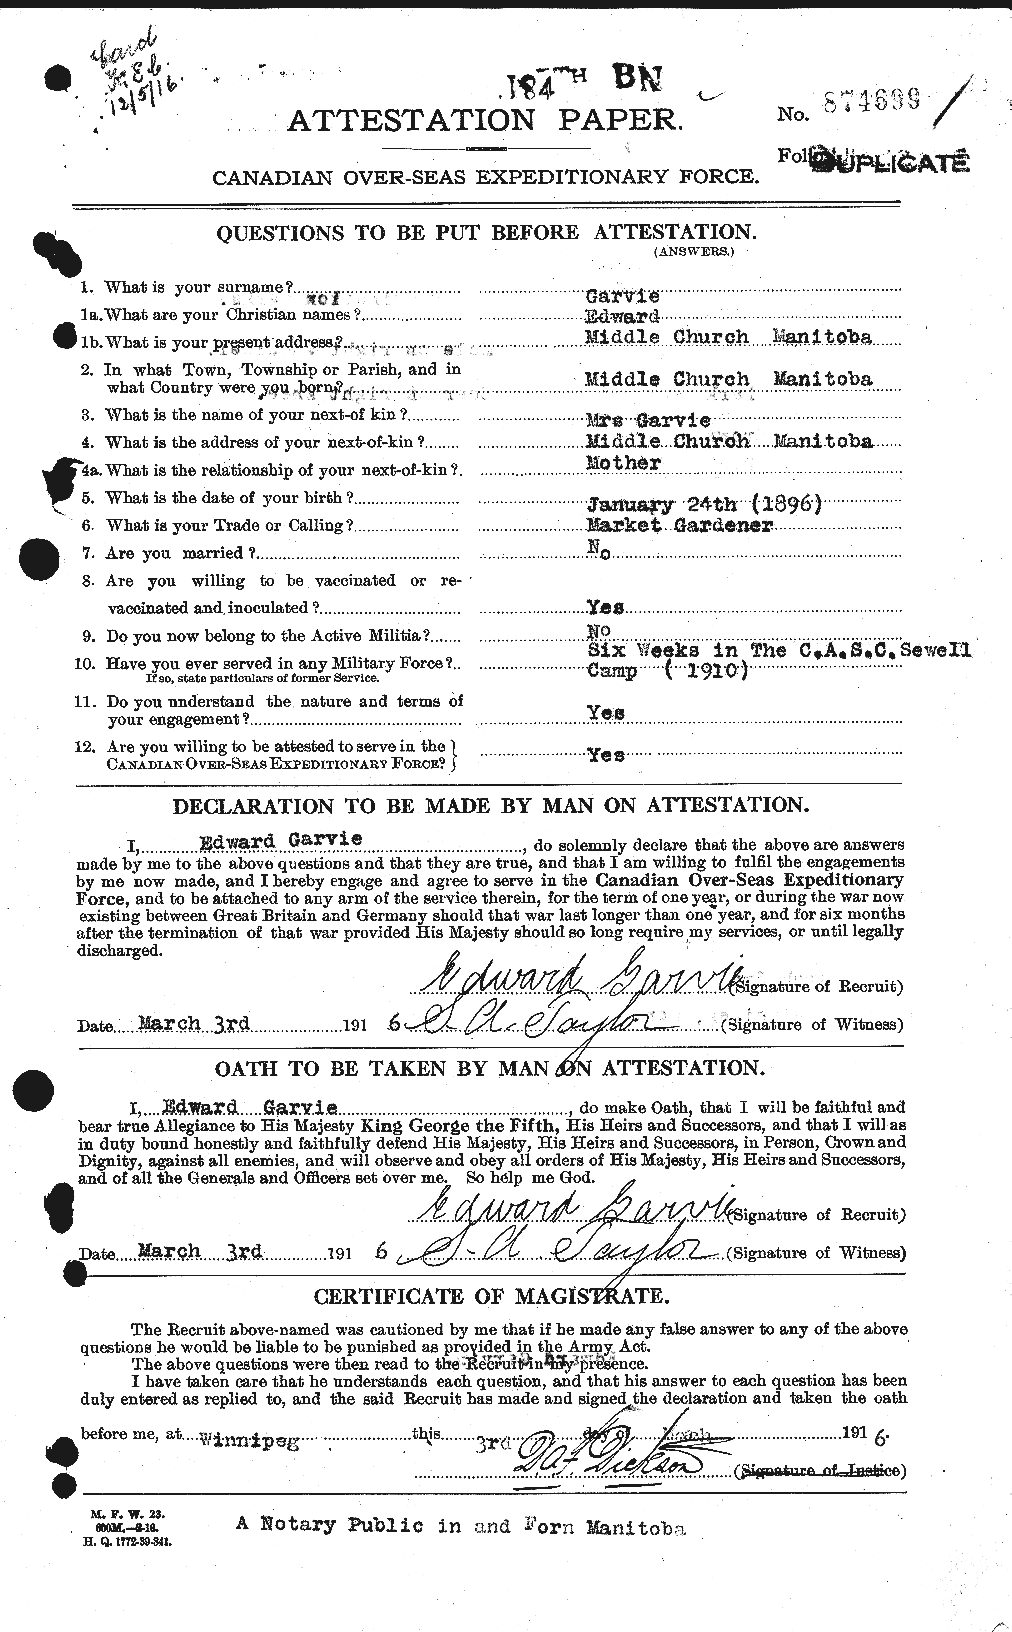 Personnel Records of the First World War - CEF 343638a